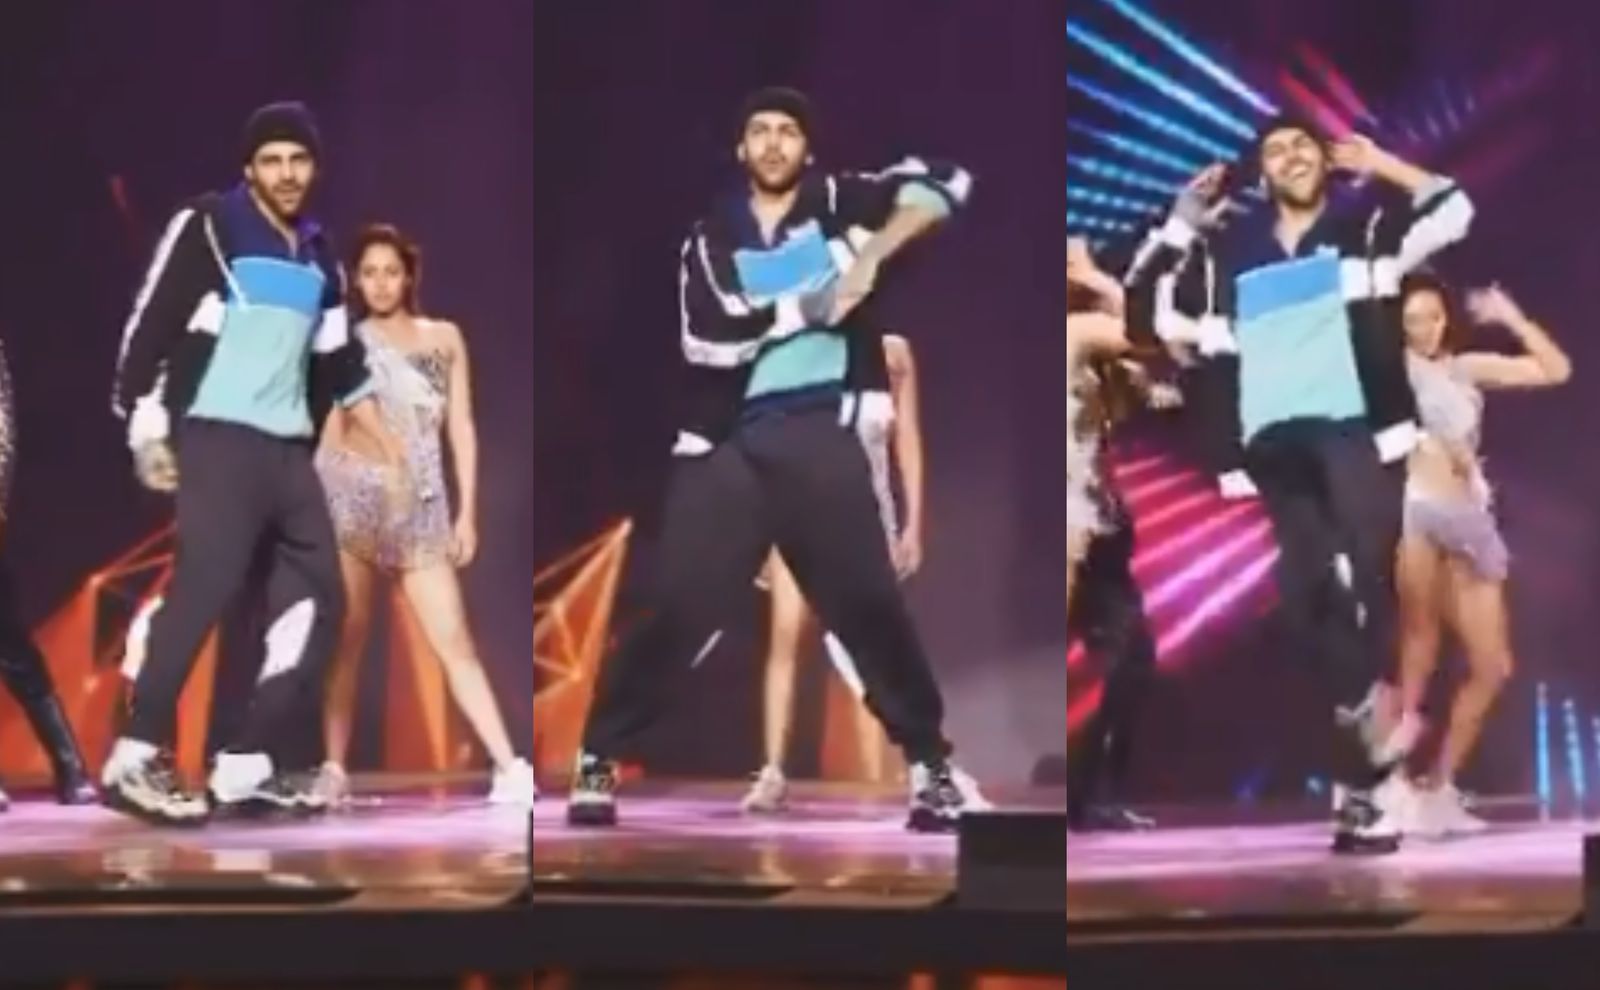 Love Aaj Kal Star Kartik Aaryan Shares A Glimpse Of His First Performance At Filmfare Awards; Watch